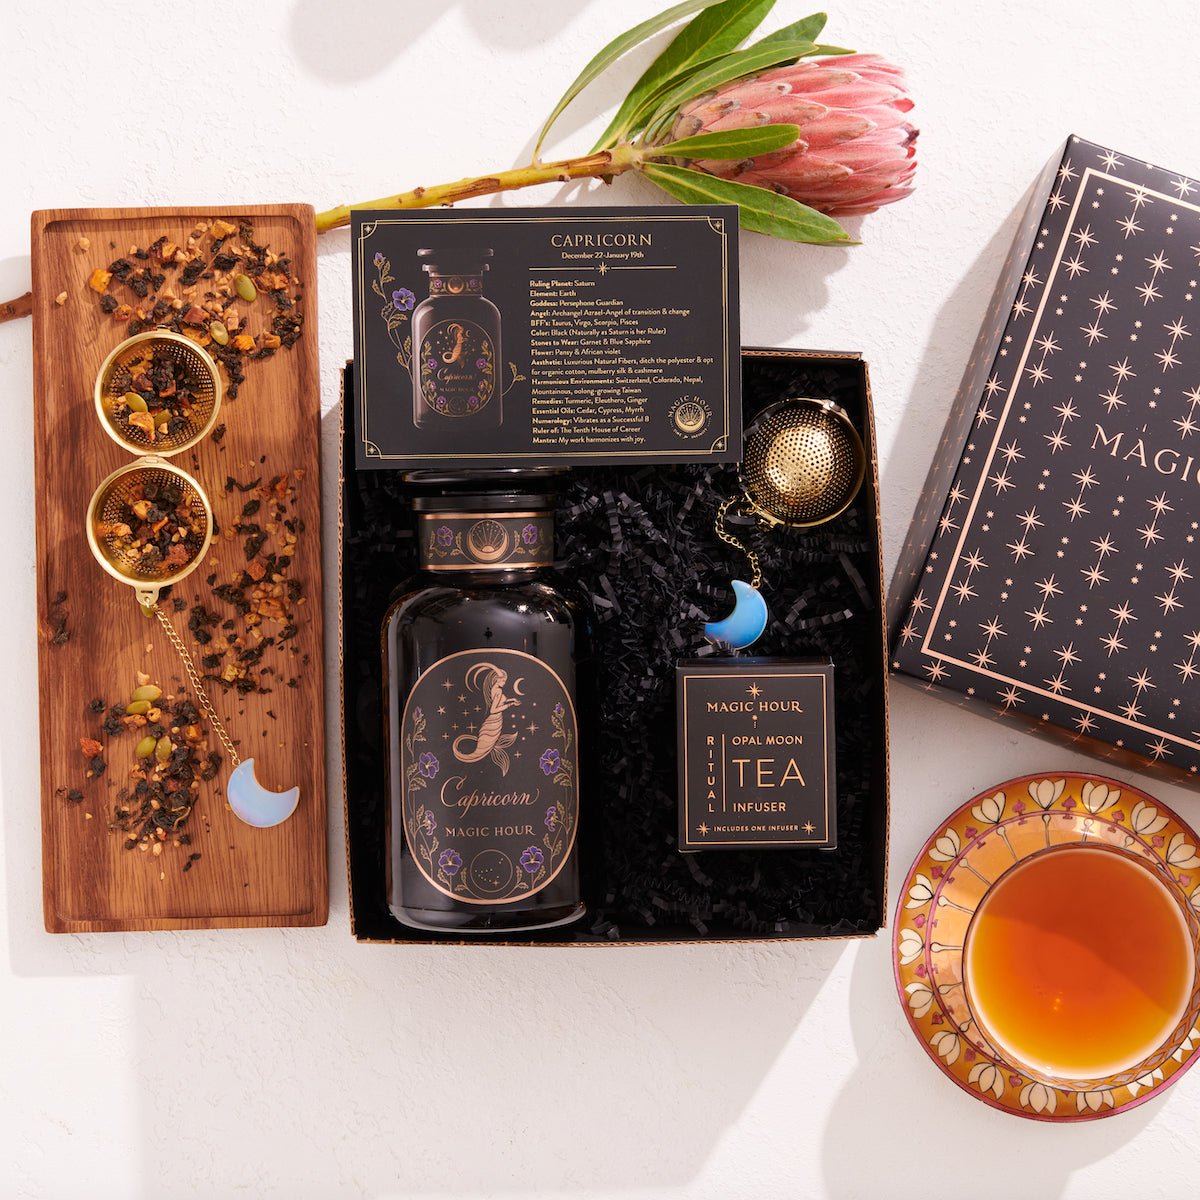 Astrology Sign Tea Apothecary Jar Gift Set-Capricorn: Violet Glass Apothecary Jar with Opalite Moon Tea Strainer-Magic Hour